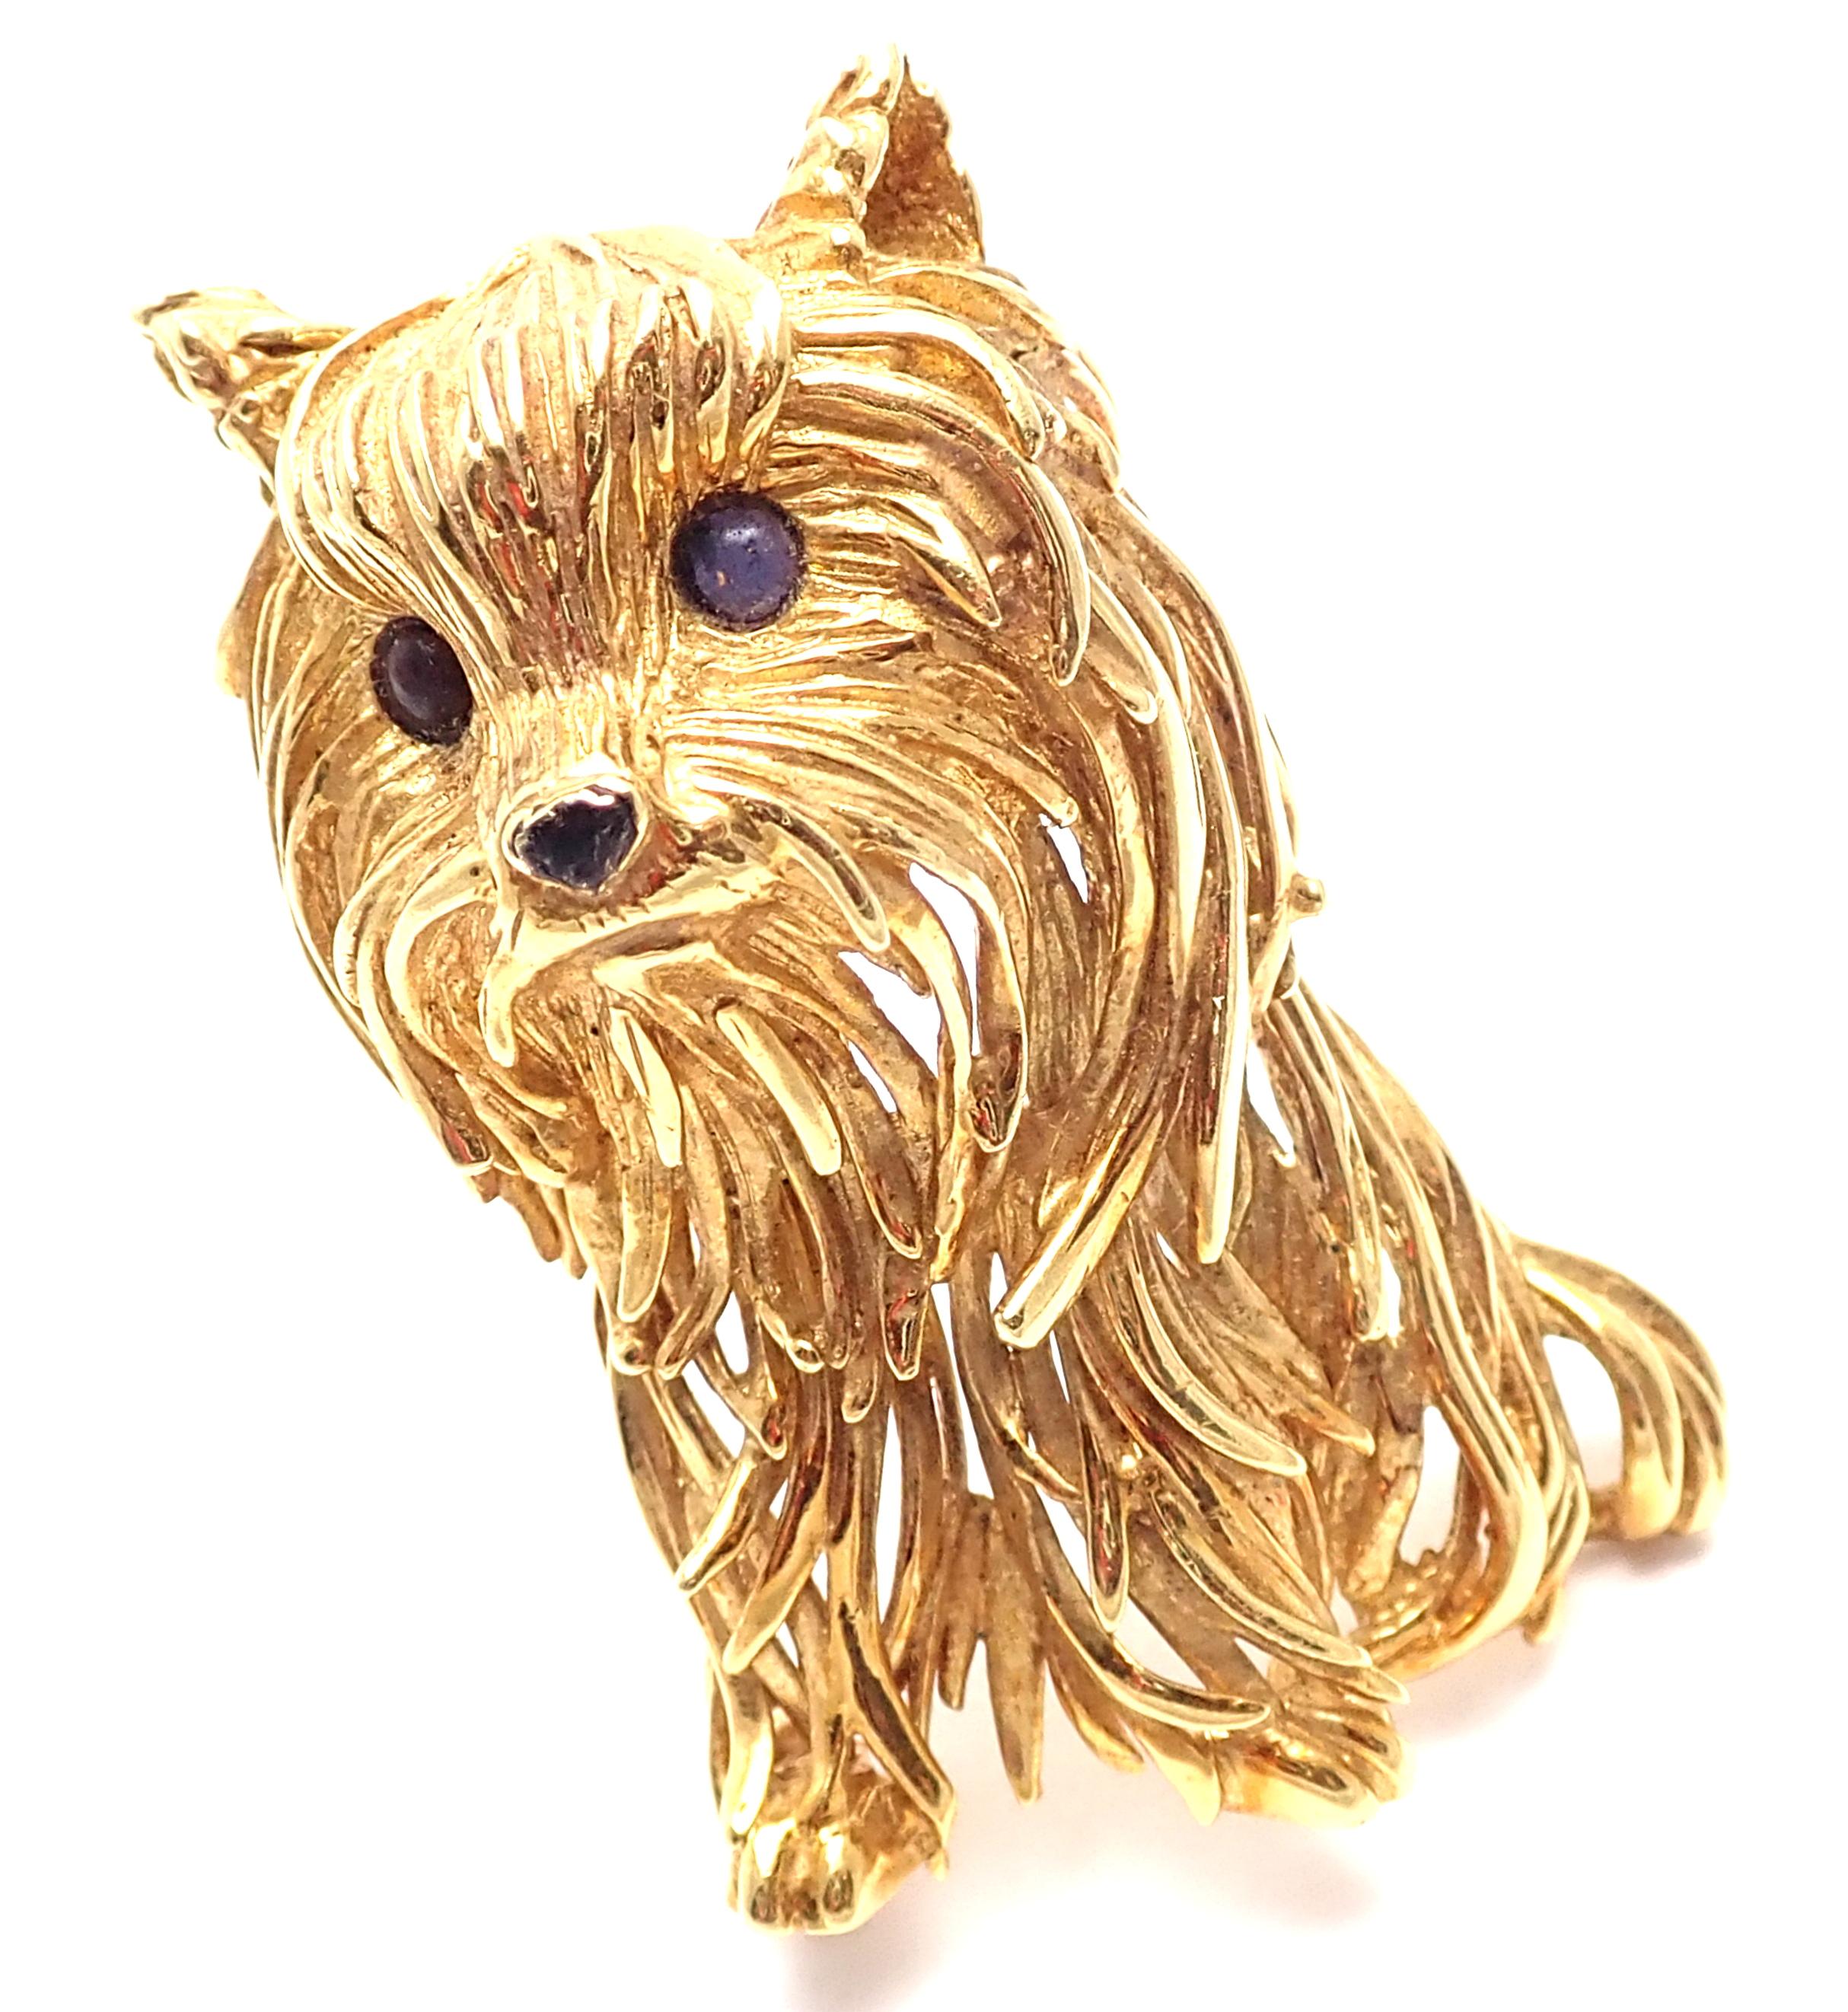 18k Yellow Gold Sapphire Large Yorkie Dog Brooch Pin by Tiffany & Co. 
With 2 round sapphires  in the eyes.
Details: 
Measurements: 1 3/4